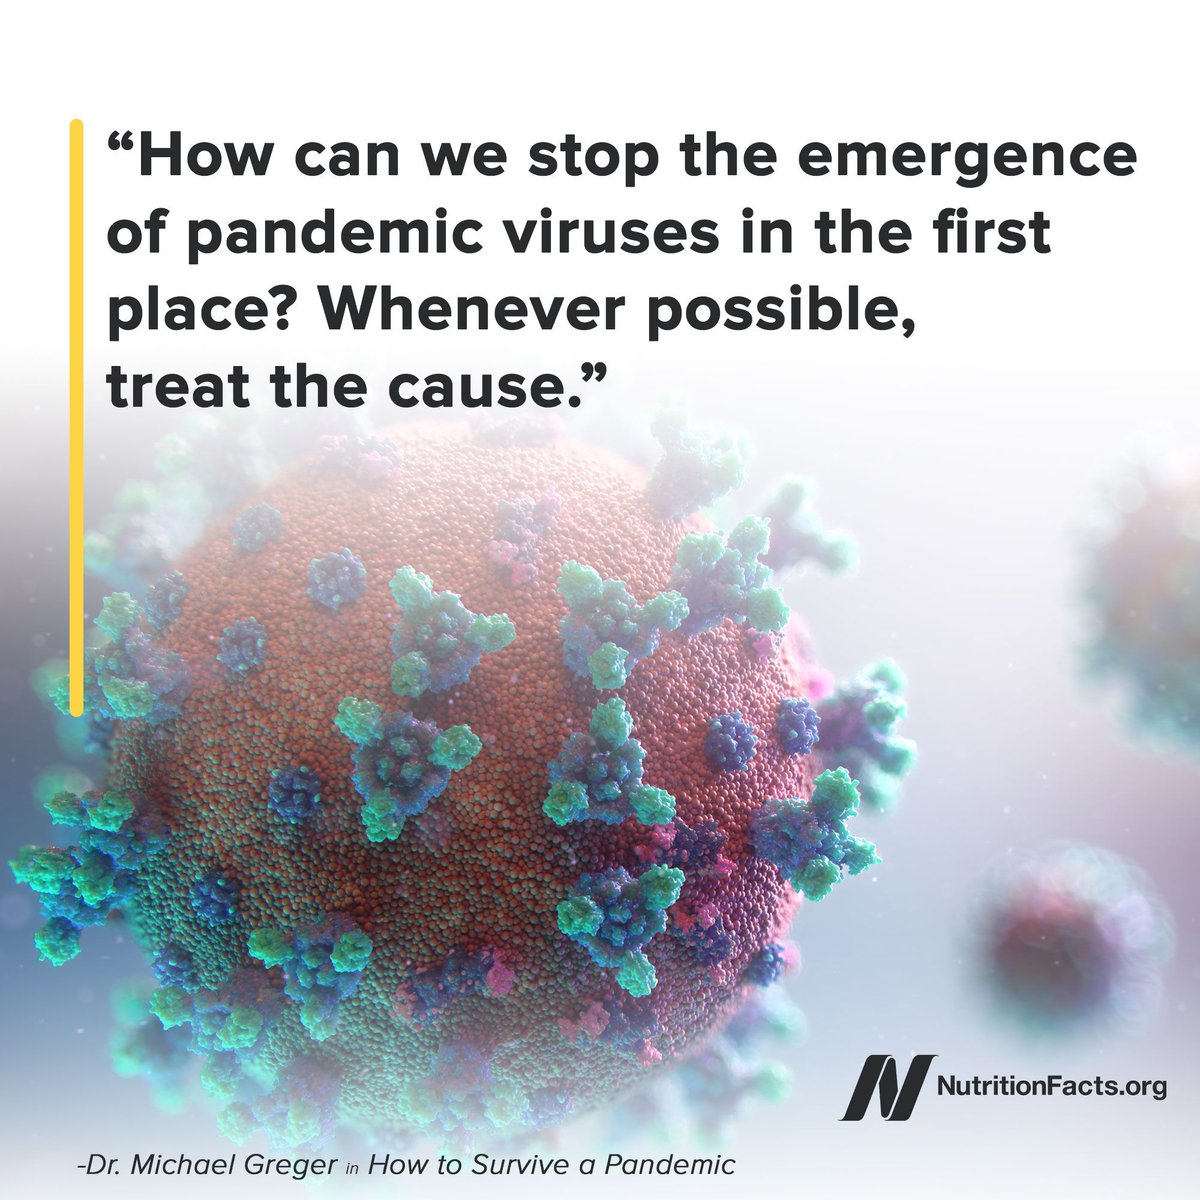 All human viral infections are believed to originate in animals. Our food choices don’t just affect our personal health, but our global health. Not just in terms of climate change, but in terms of pandemic risk. bit.ly/3f2W5NS